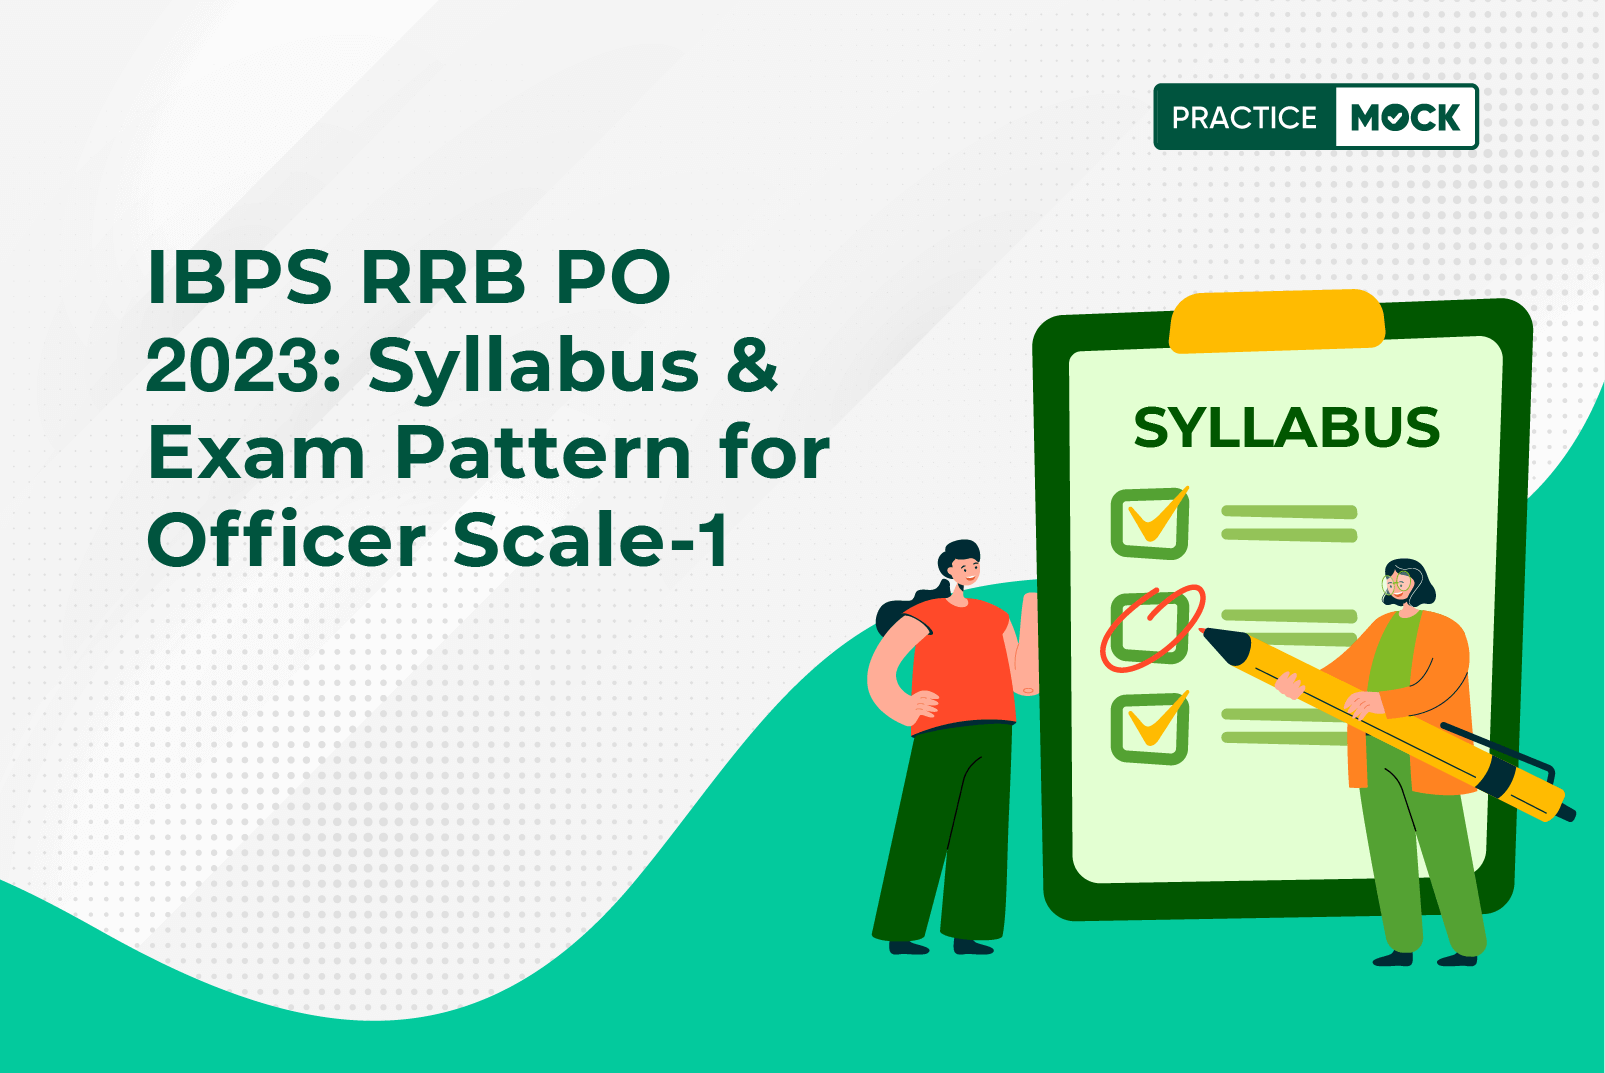 IBPS RRB PO 2023 Exam-Syllabus for Officer Scale 1